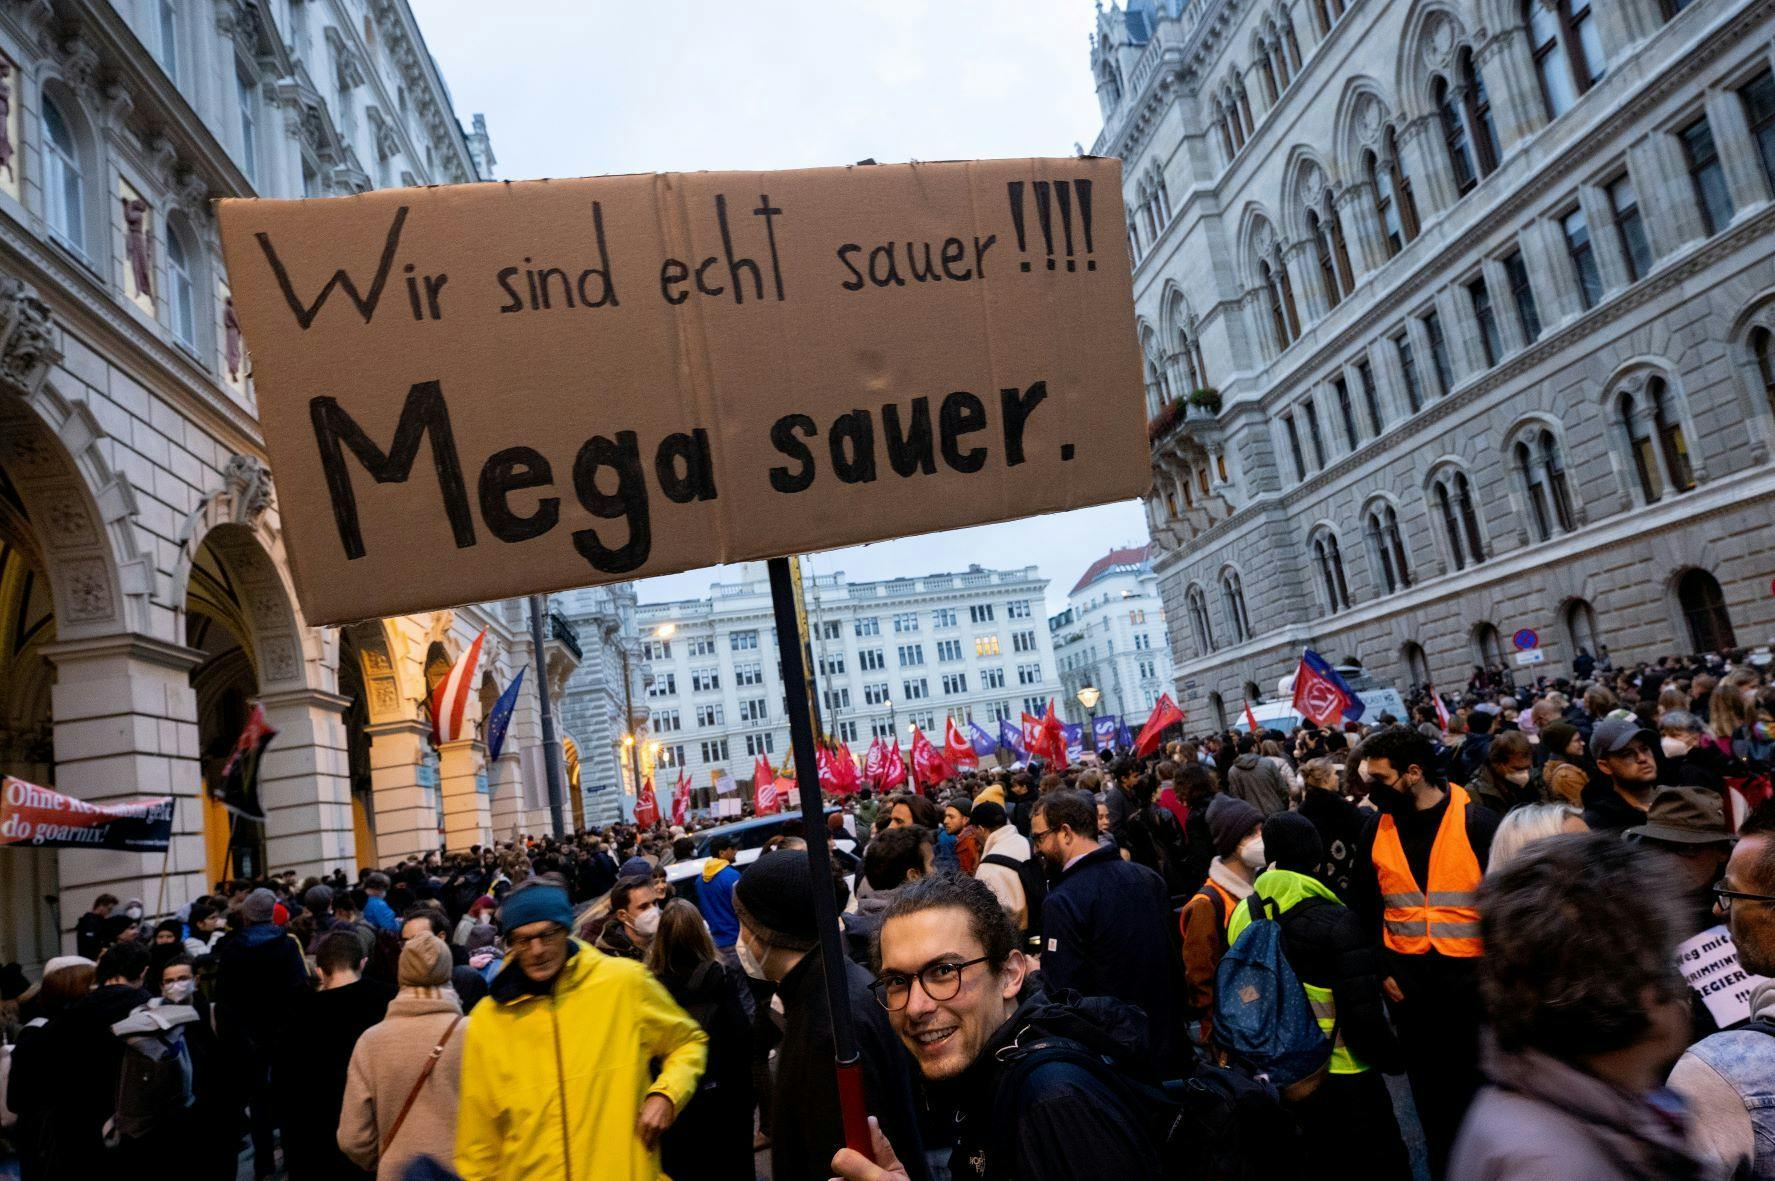 Protesters in Vienna, Austria demanding Chancellor Sebastian Kurz's resignation, German-language sign reads: "We are really angry, mega angry"